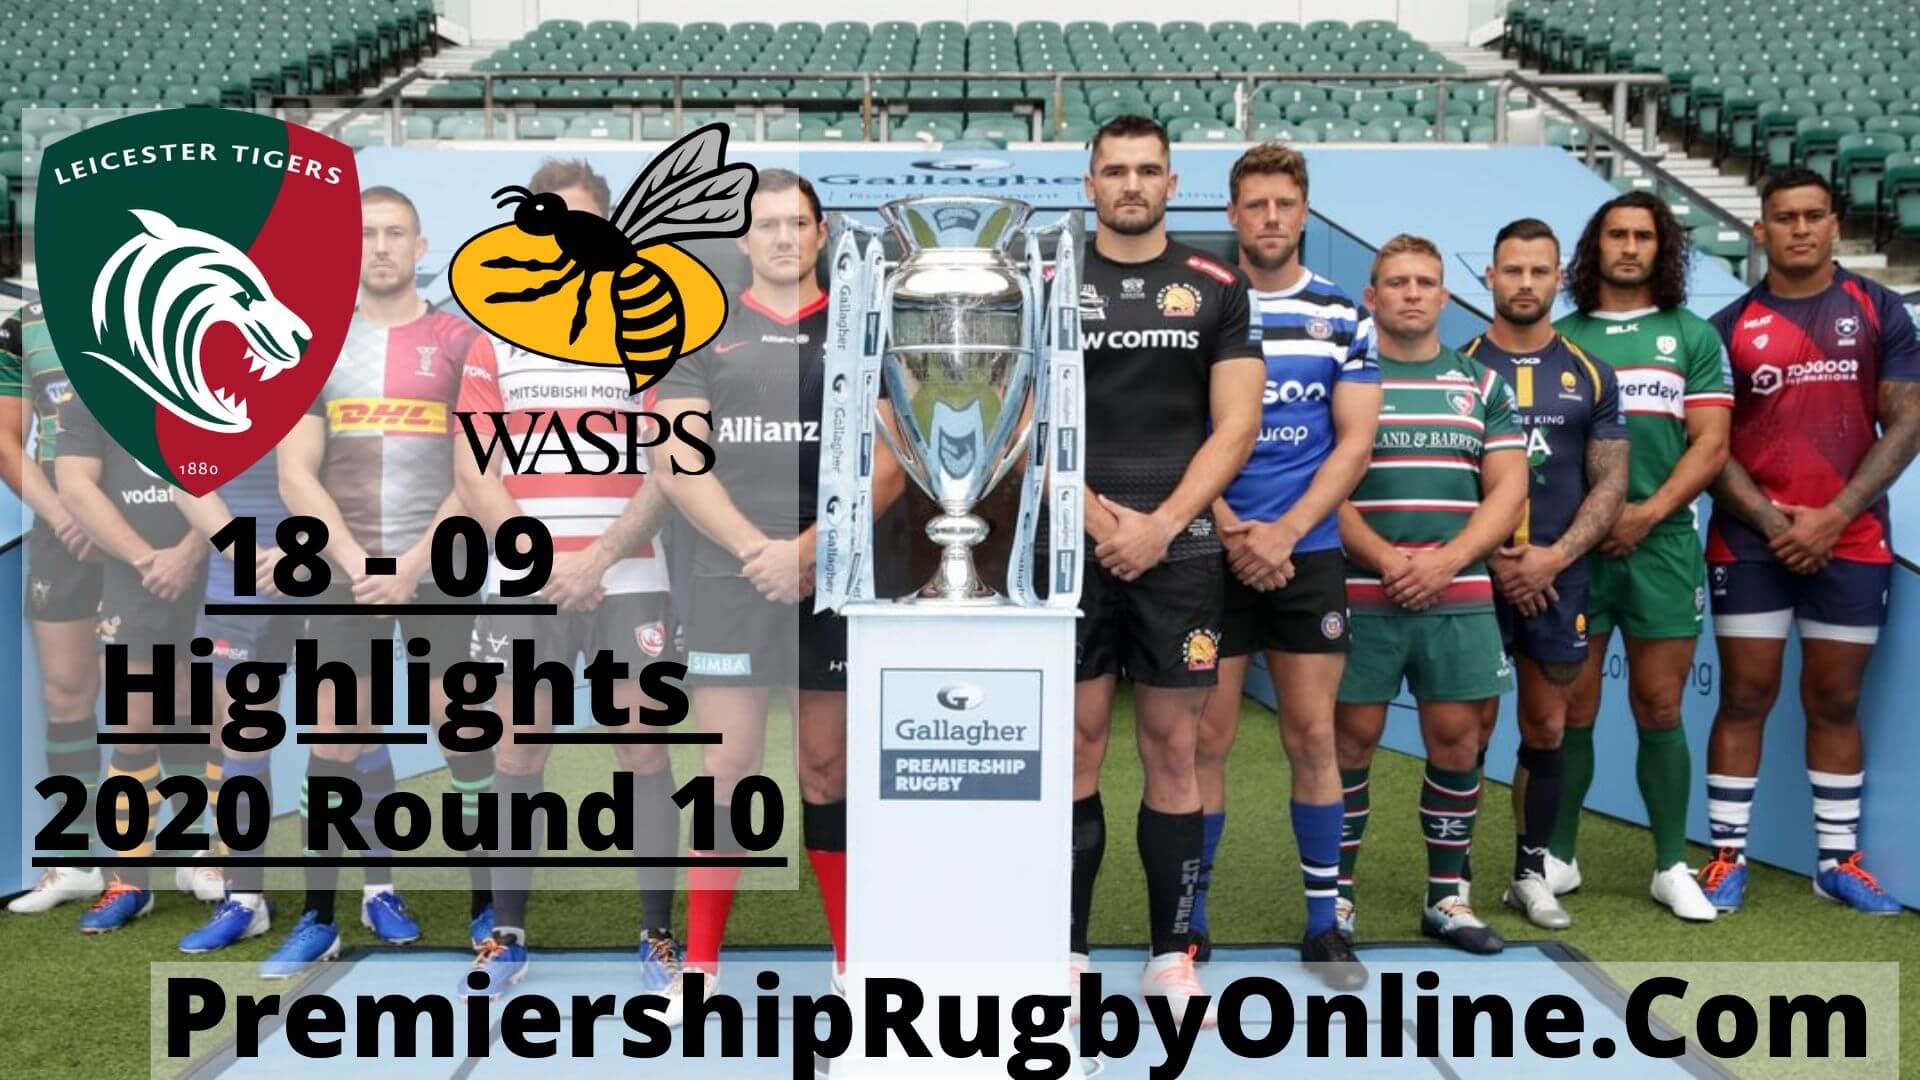 Leicester Tigers Vs Wasps Highlights 2020 RD 10